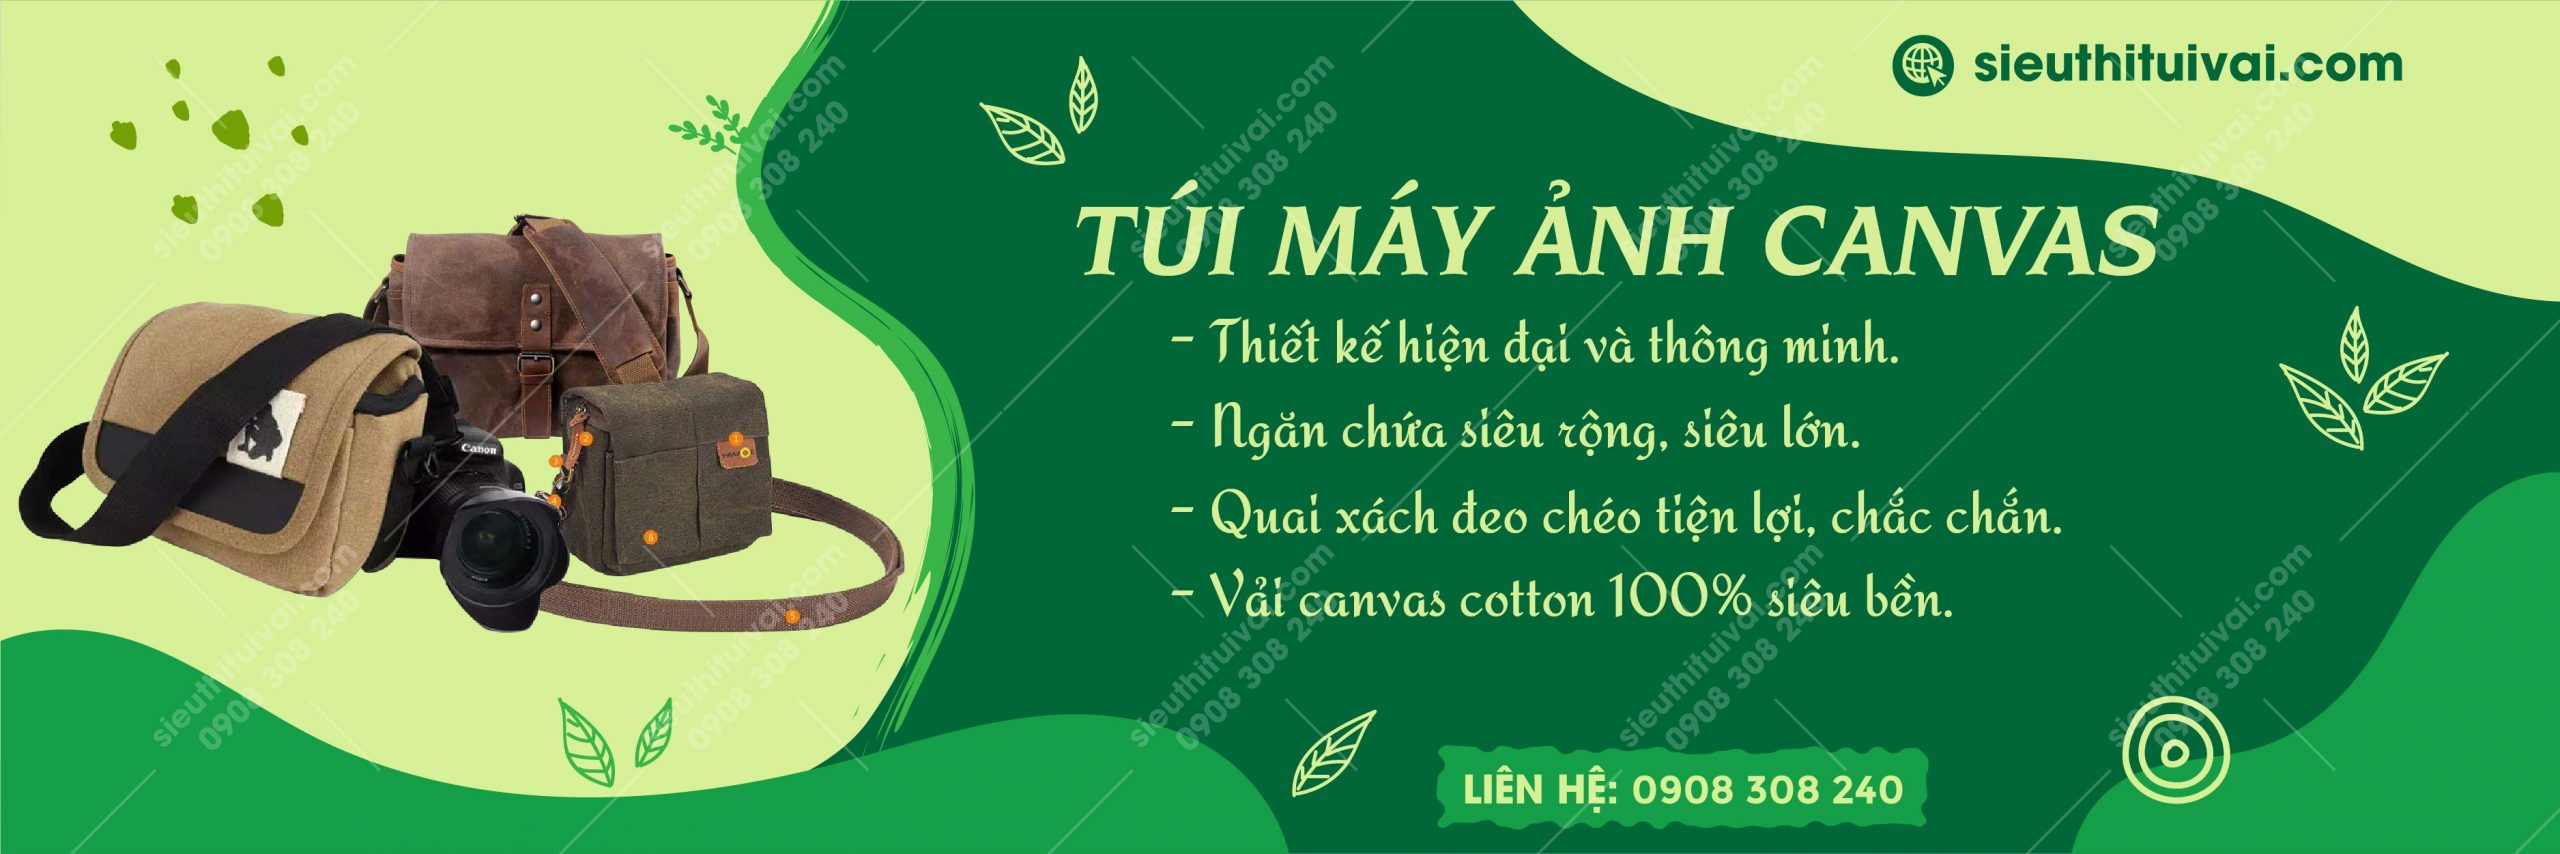 tui-may-anh-canvas-01